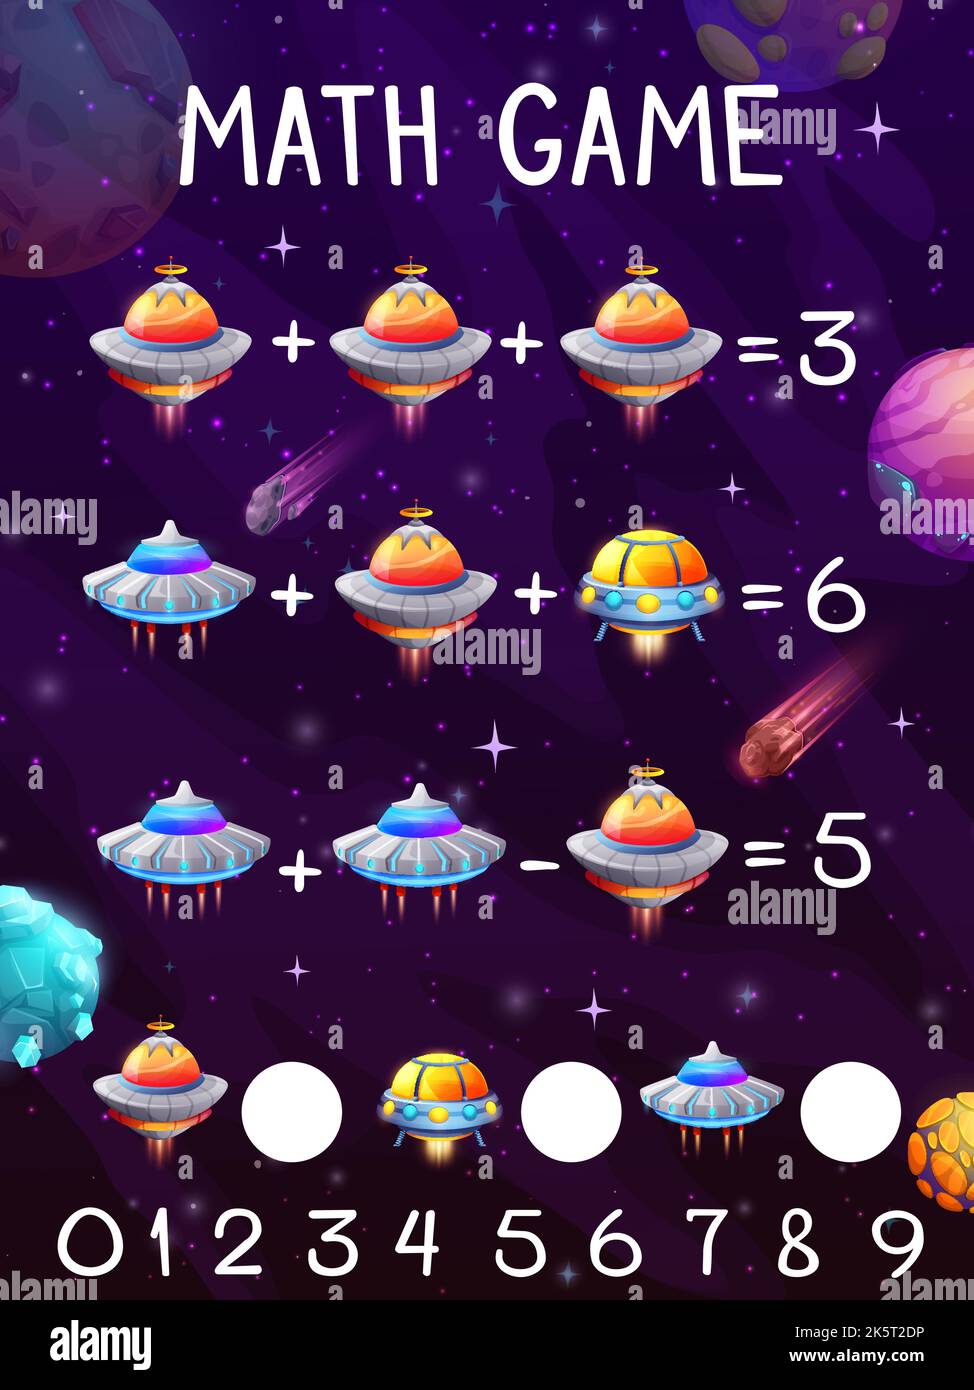 math-game-worksheet-galaxy-space-and-alien-ufo-flying-saucers-vector-education-quiz-kids-math